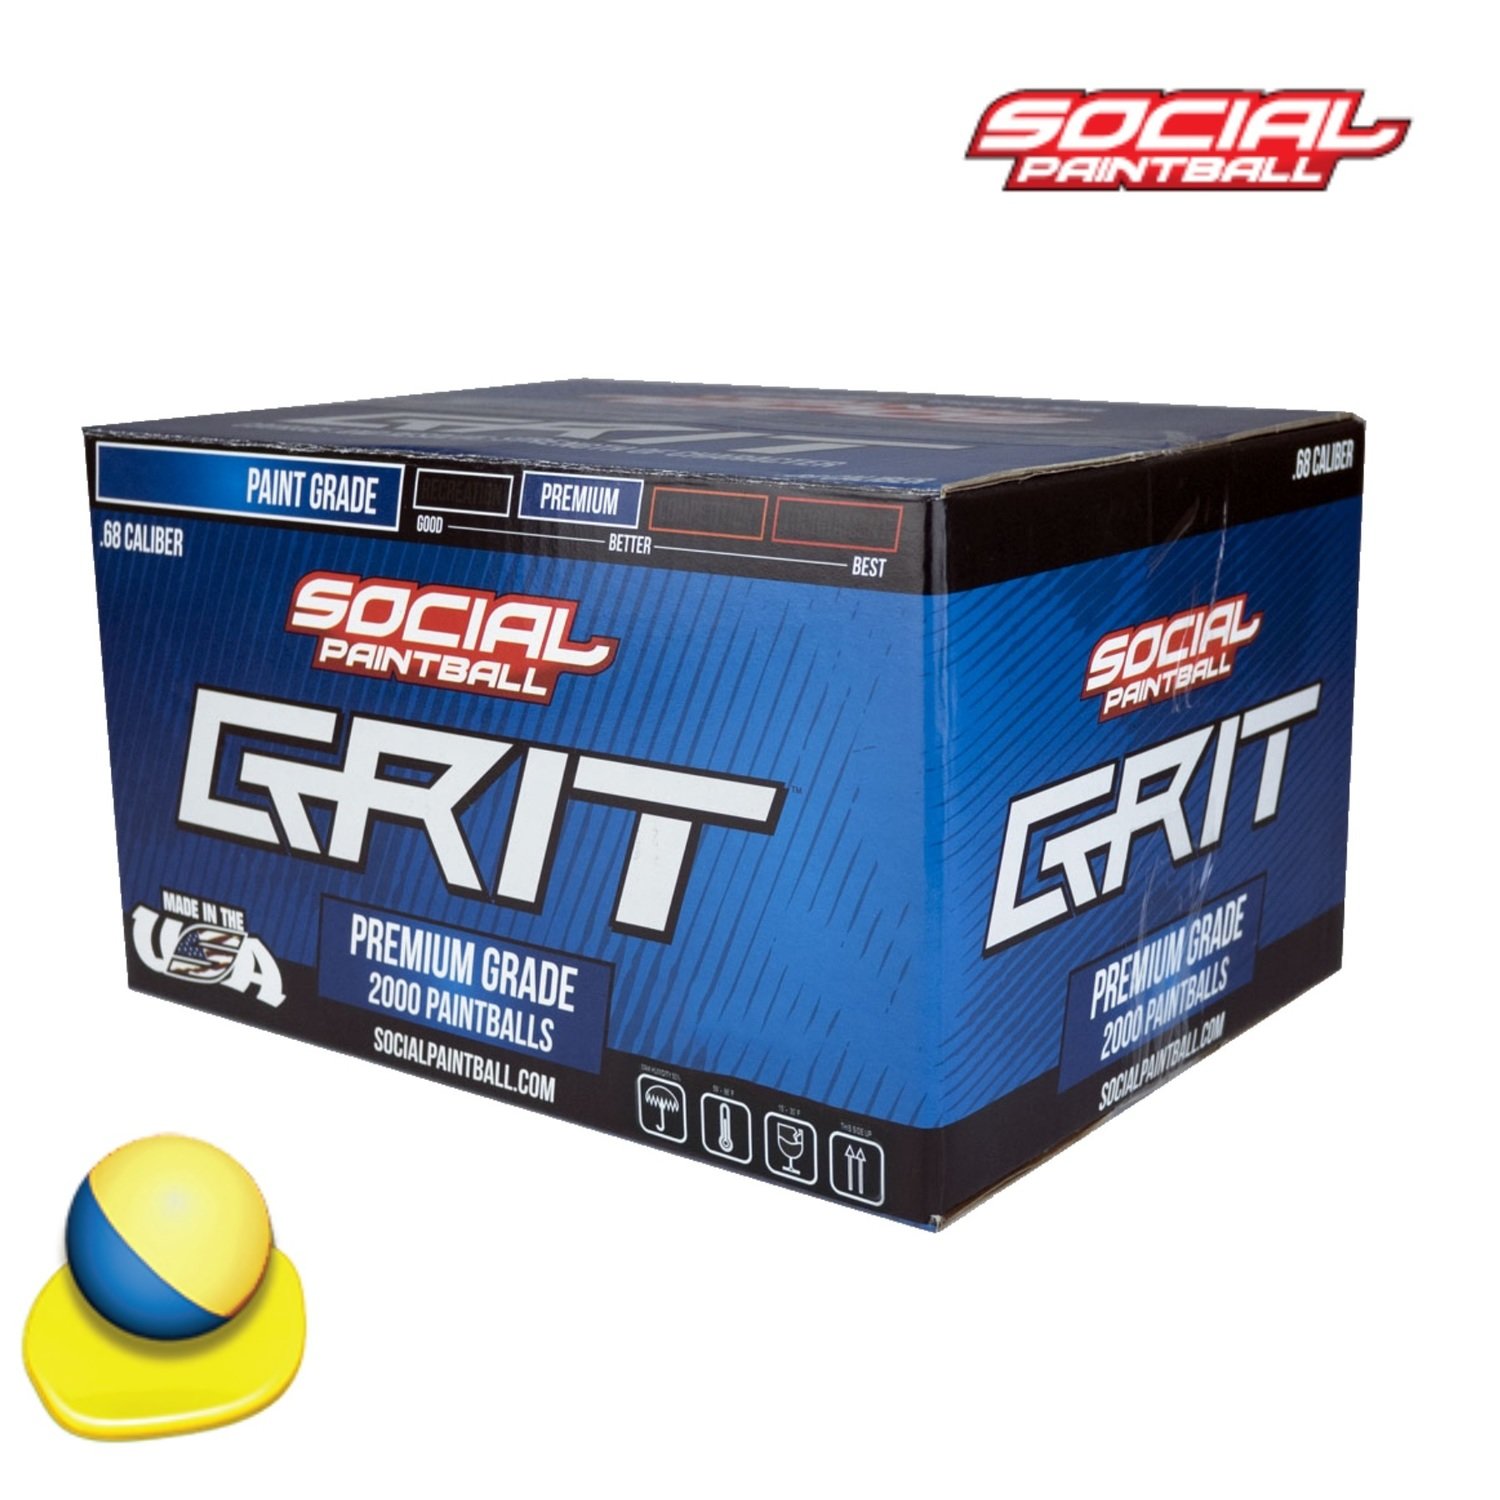 Social Paintball Grit .68 cal Paintballs - Case of 2000 Rds - Blue/Yellow Shell - Yellow Fill